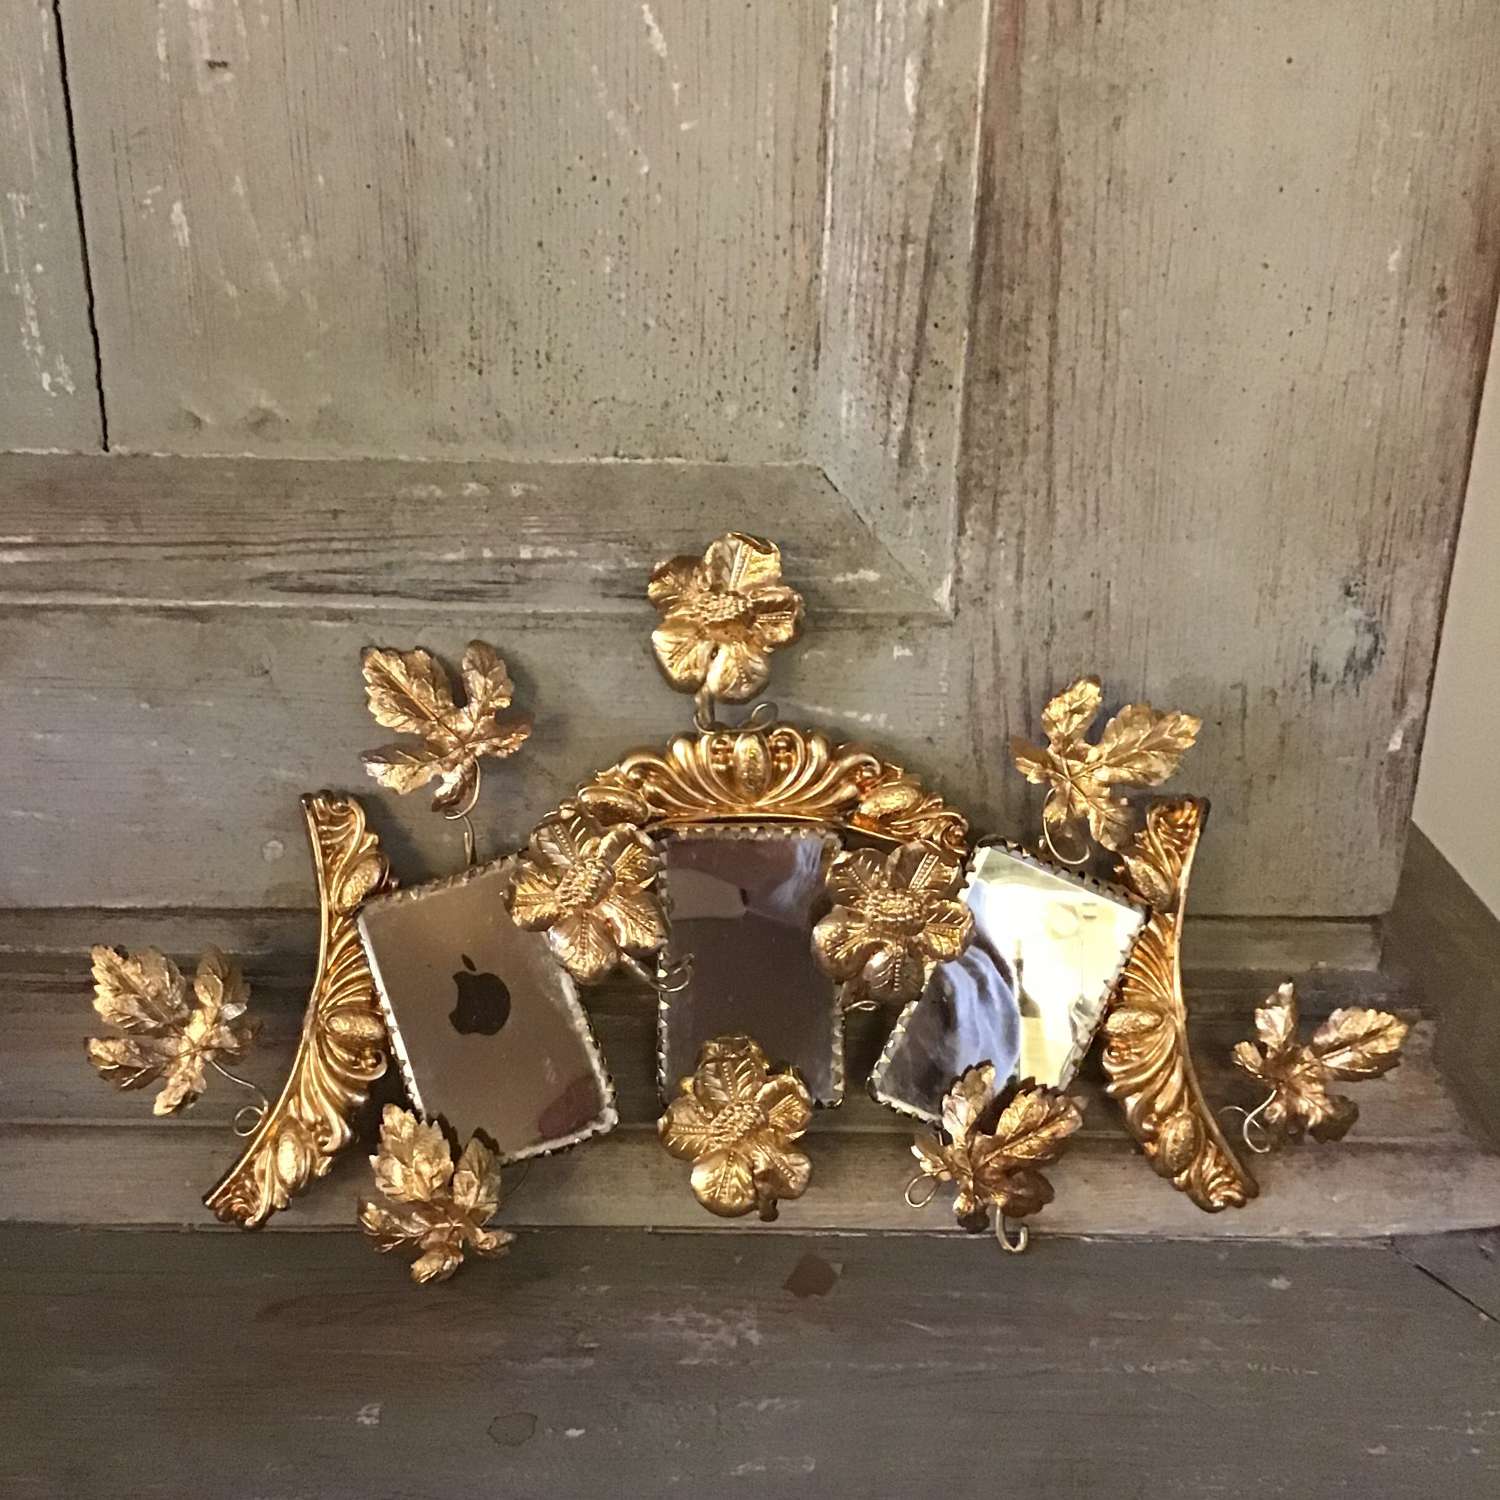 Antique decorative mirrored piece from a French marriage dome